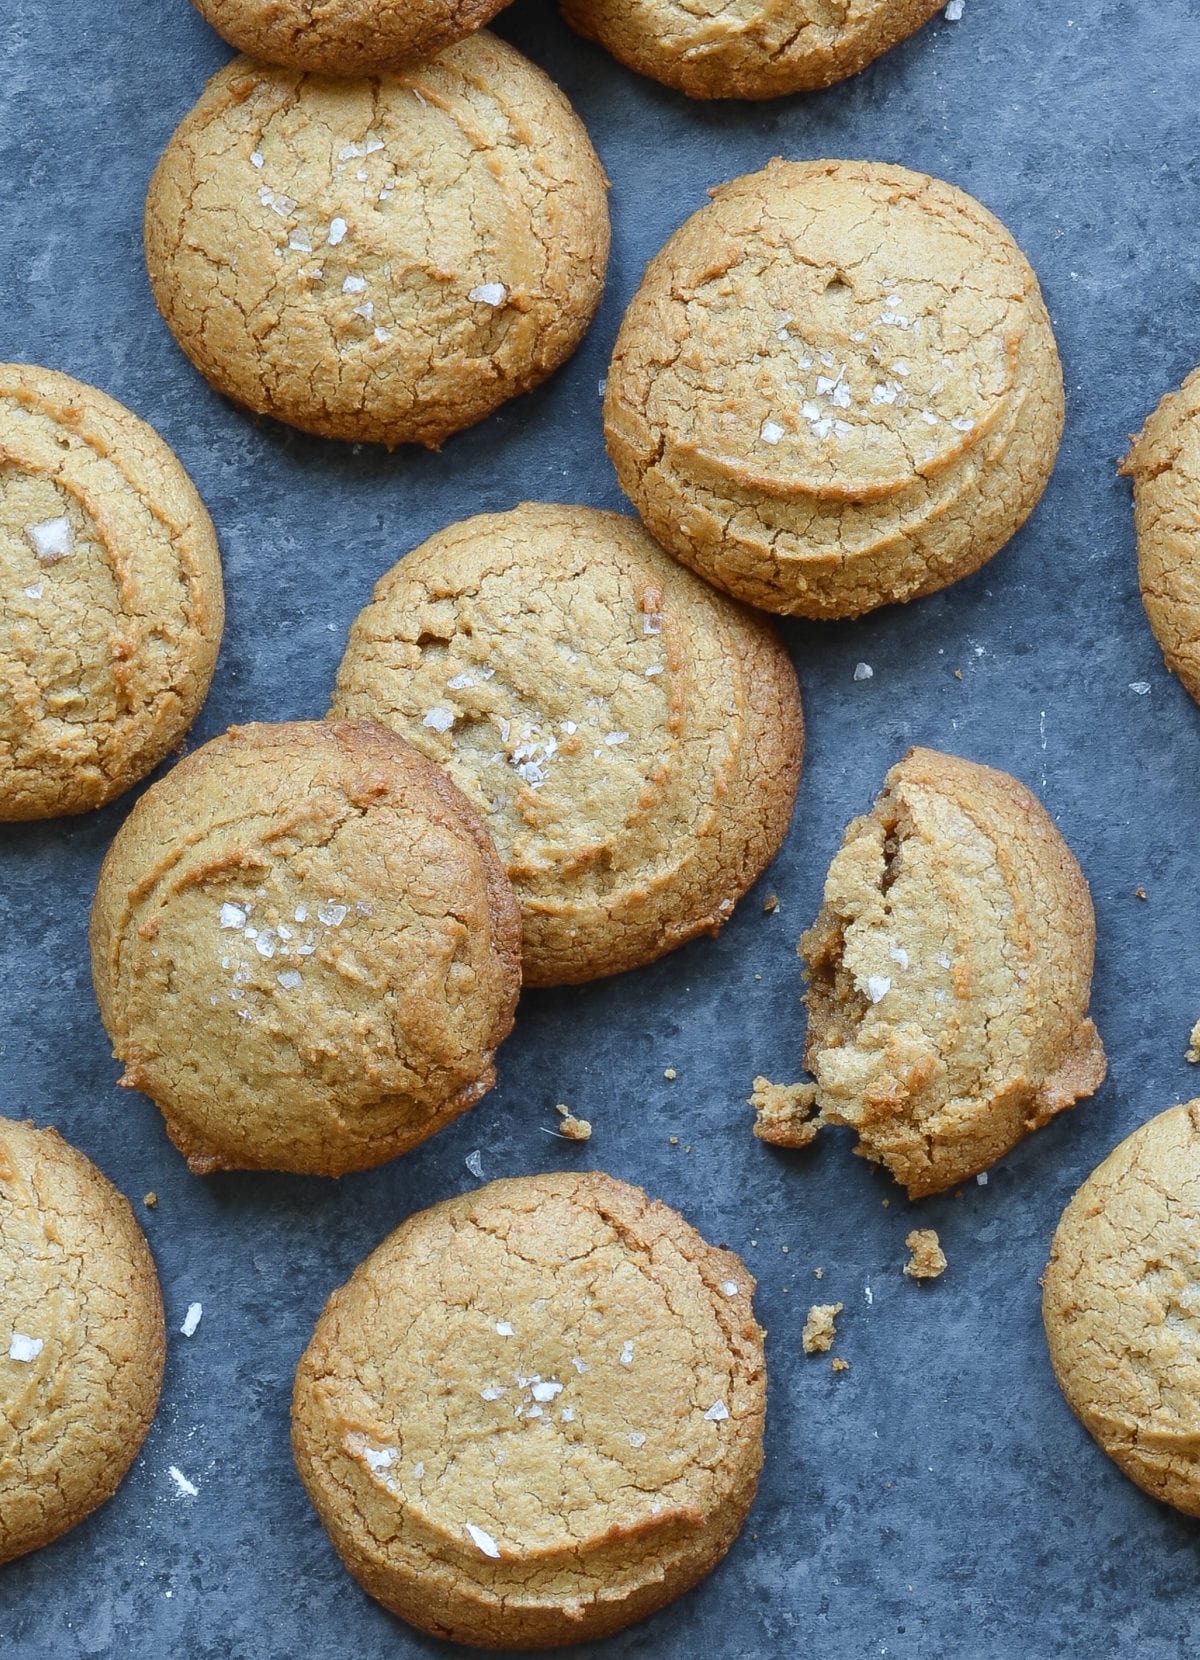 Flourless peanut butter cookies, one of which is broken.